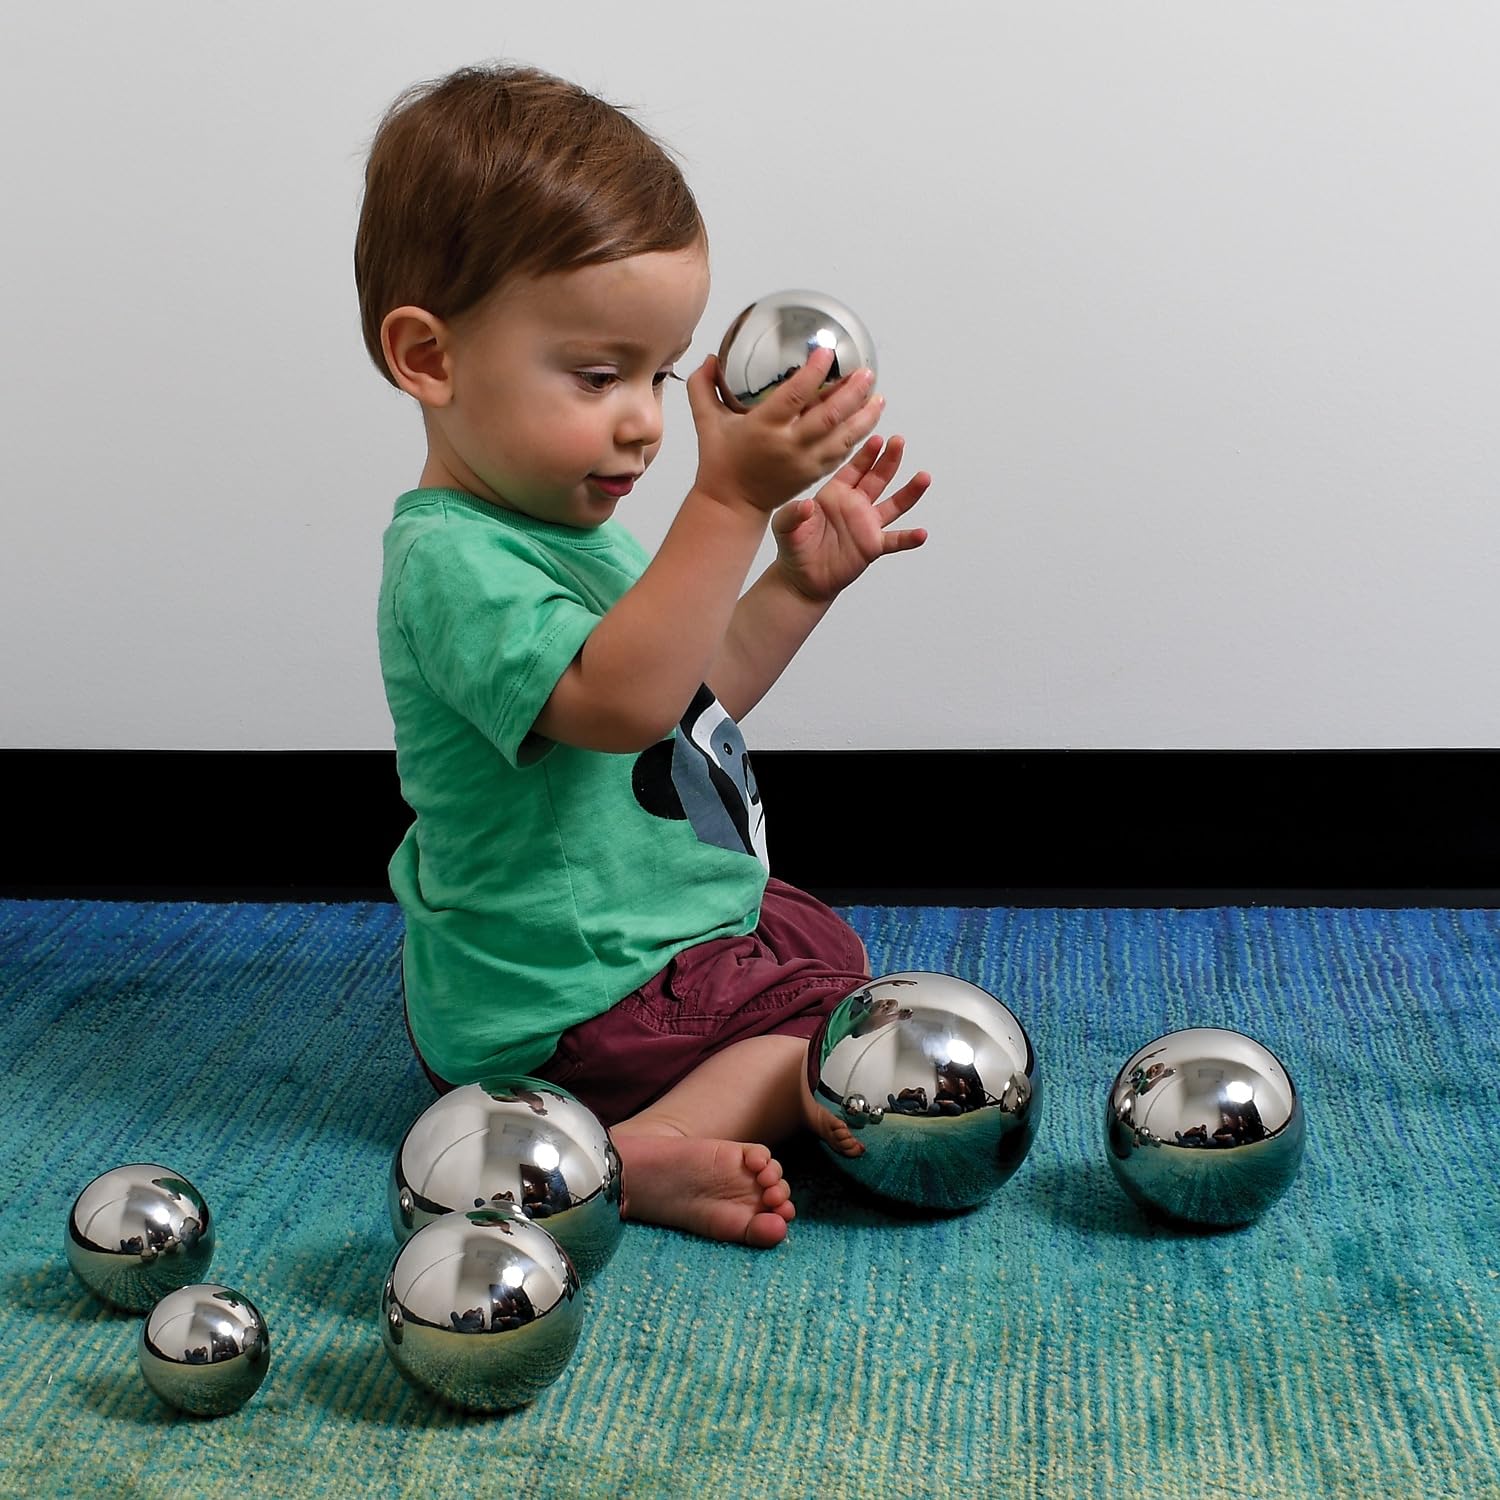 TickiT Sensory Reflective Sound Balls - Set of 7 - Multi-sensory Toy for Babies, Toddlers - Resource for Special Educational Needs